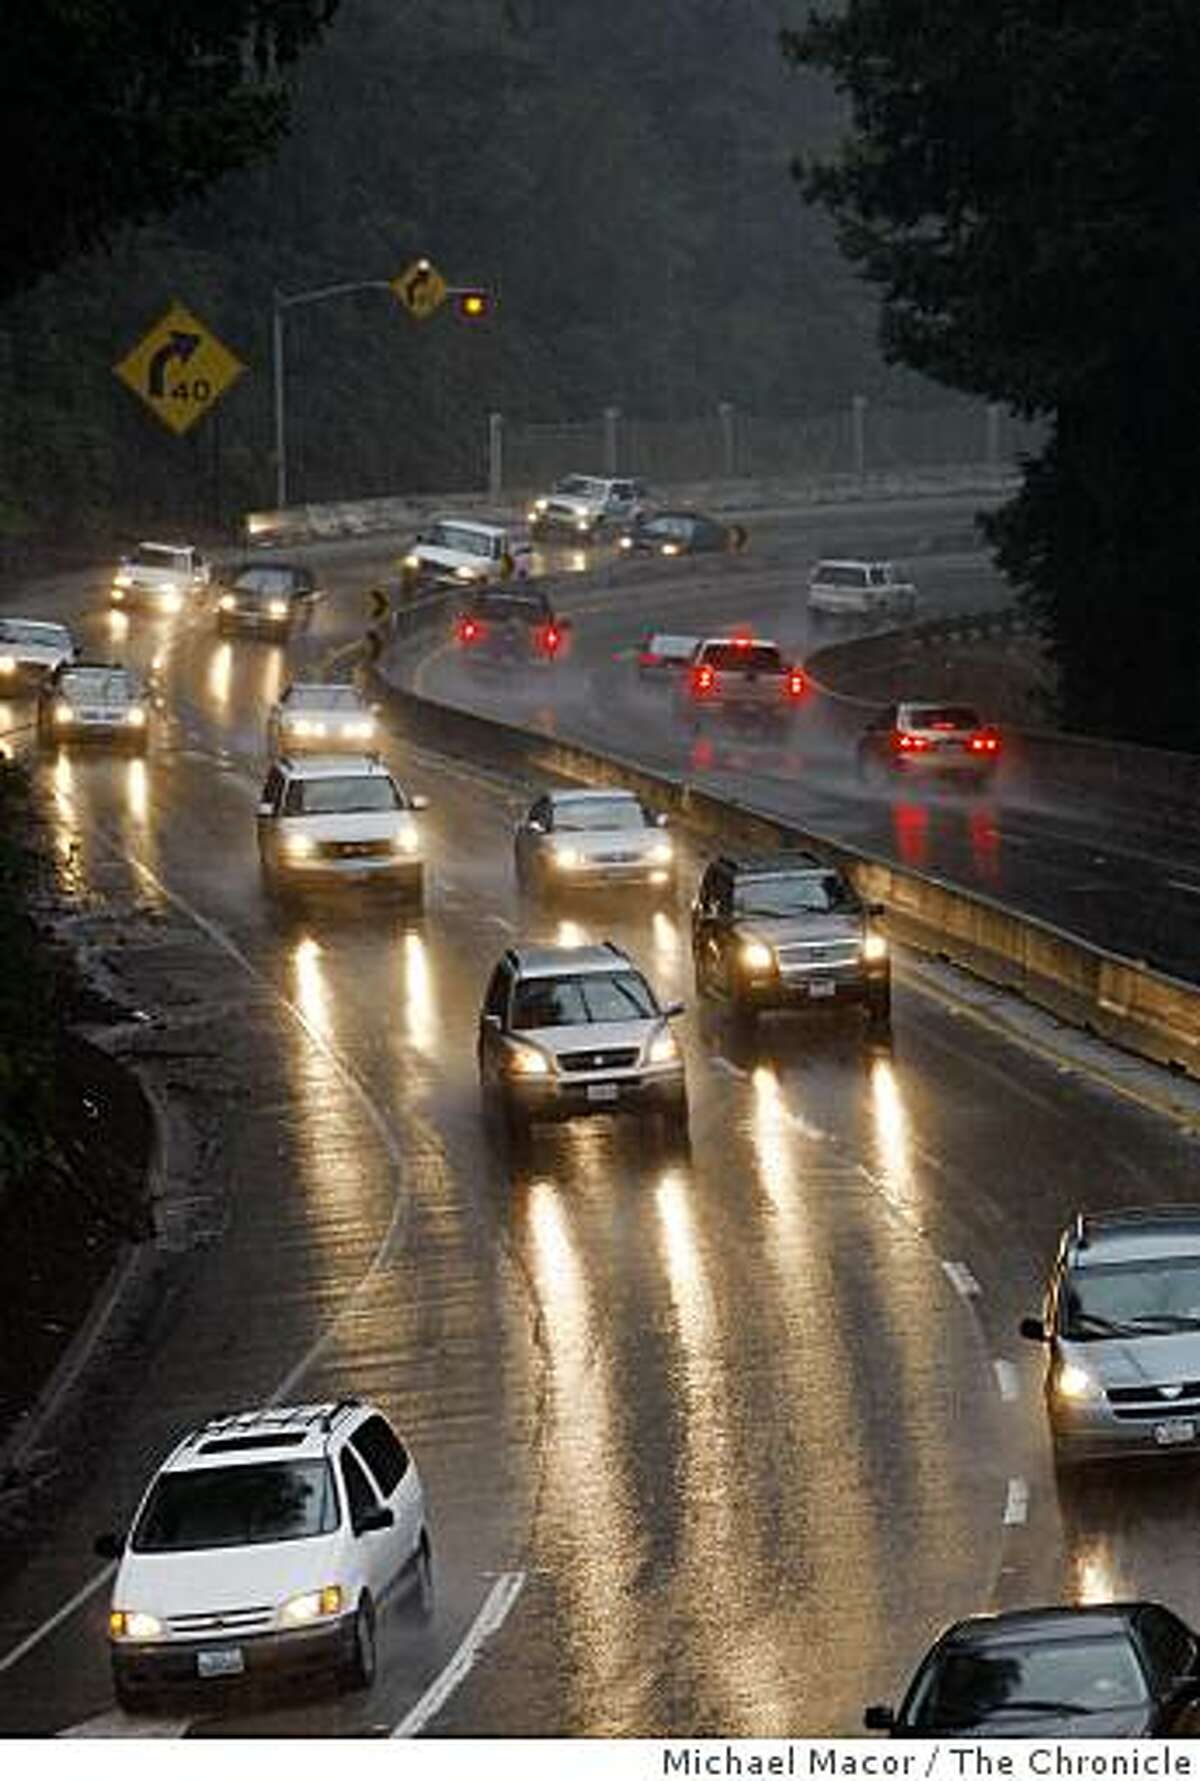 Motorists travel over the summit between Santa Cruz and Los Gatos, on Tuesday Feb. 17, 2009, as rains continue to fall along Highway 17 in the Santa Cruz Mountains.